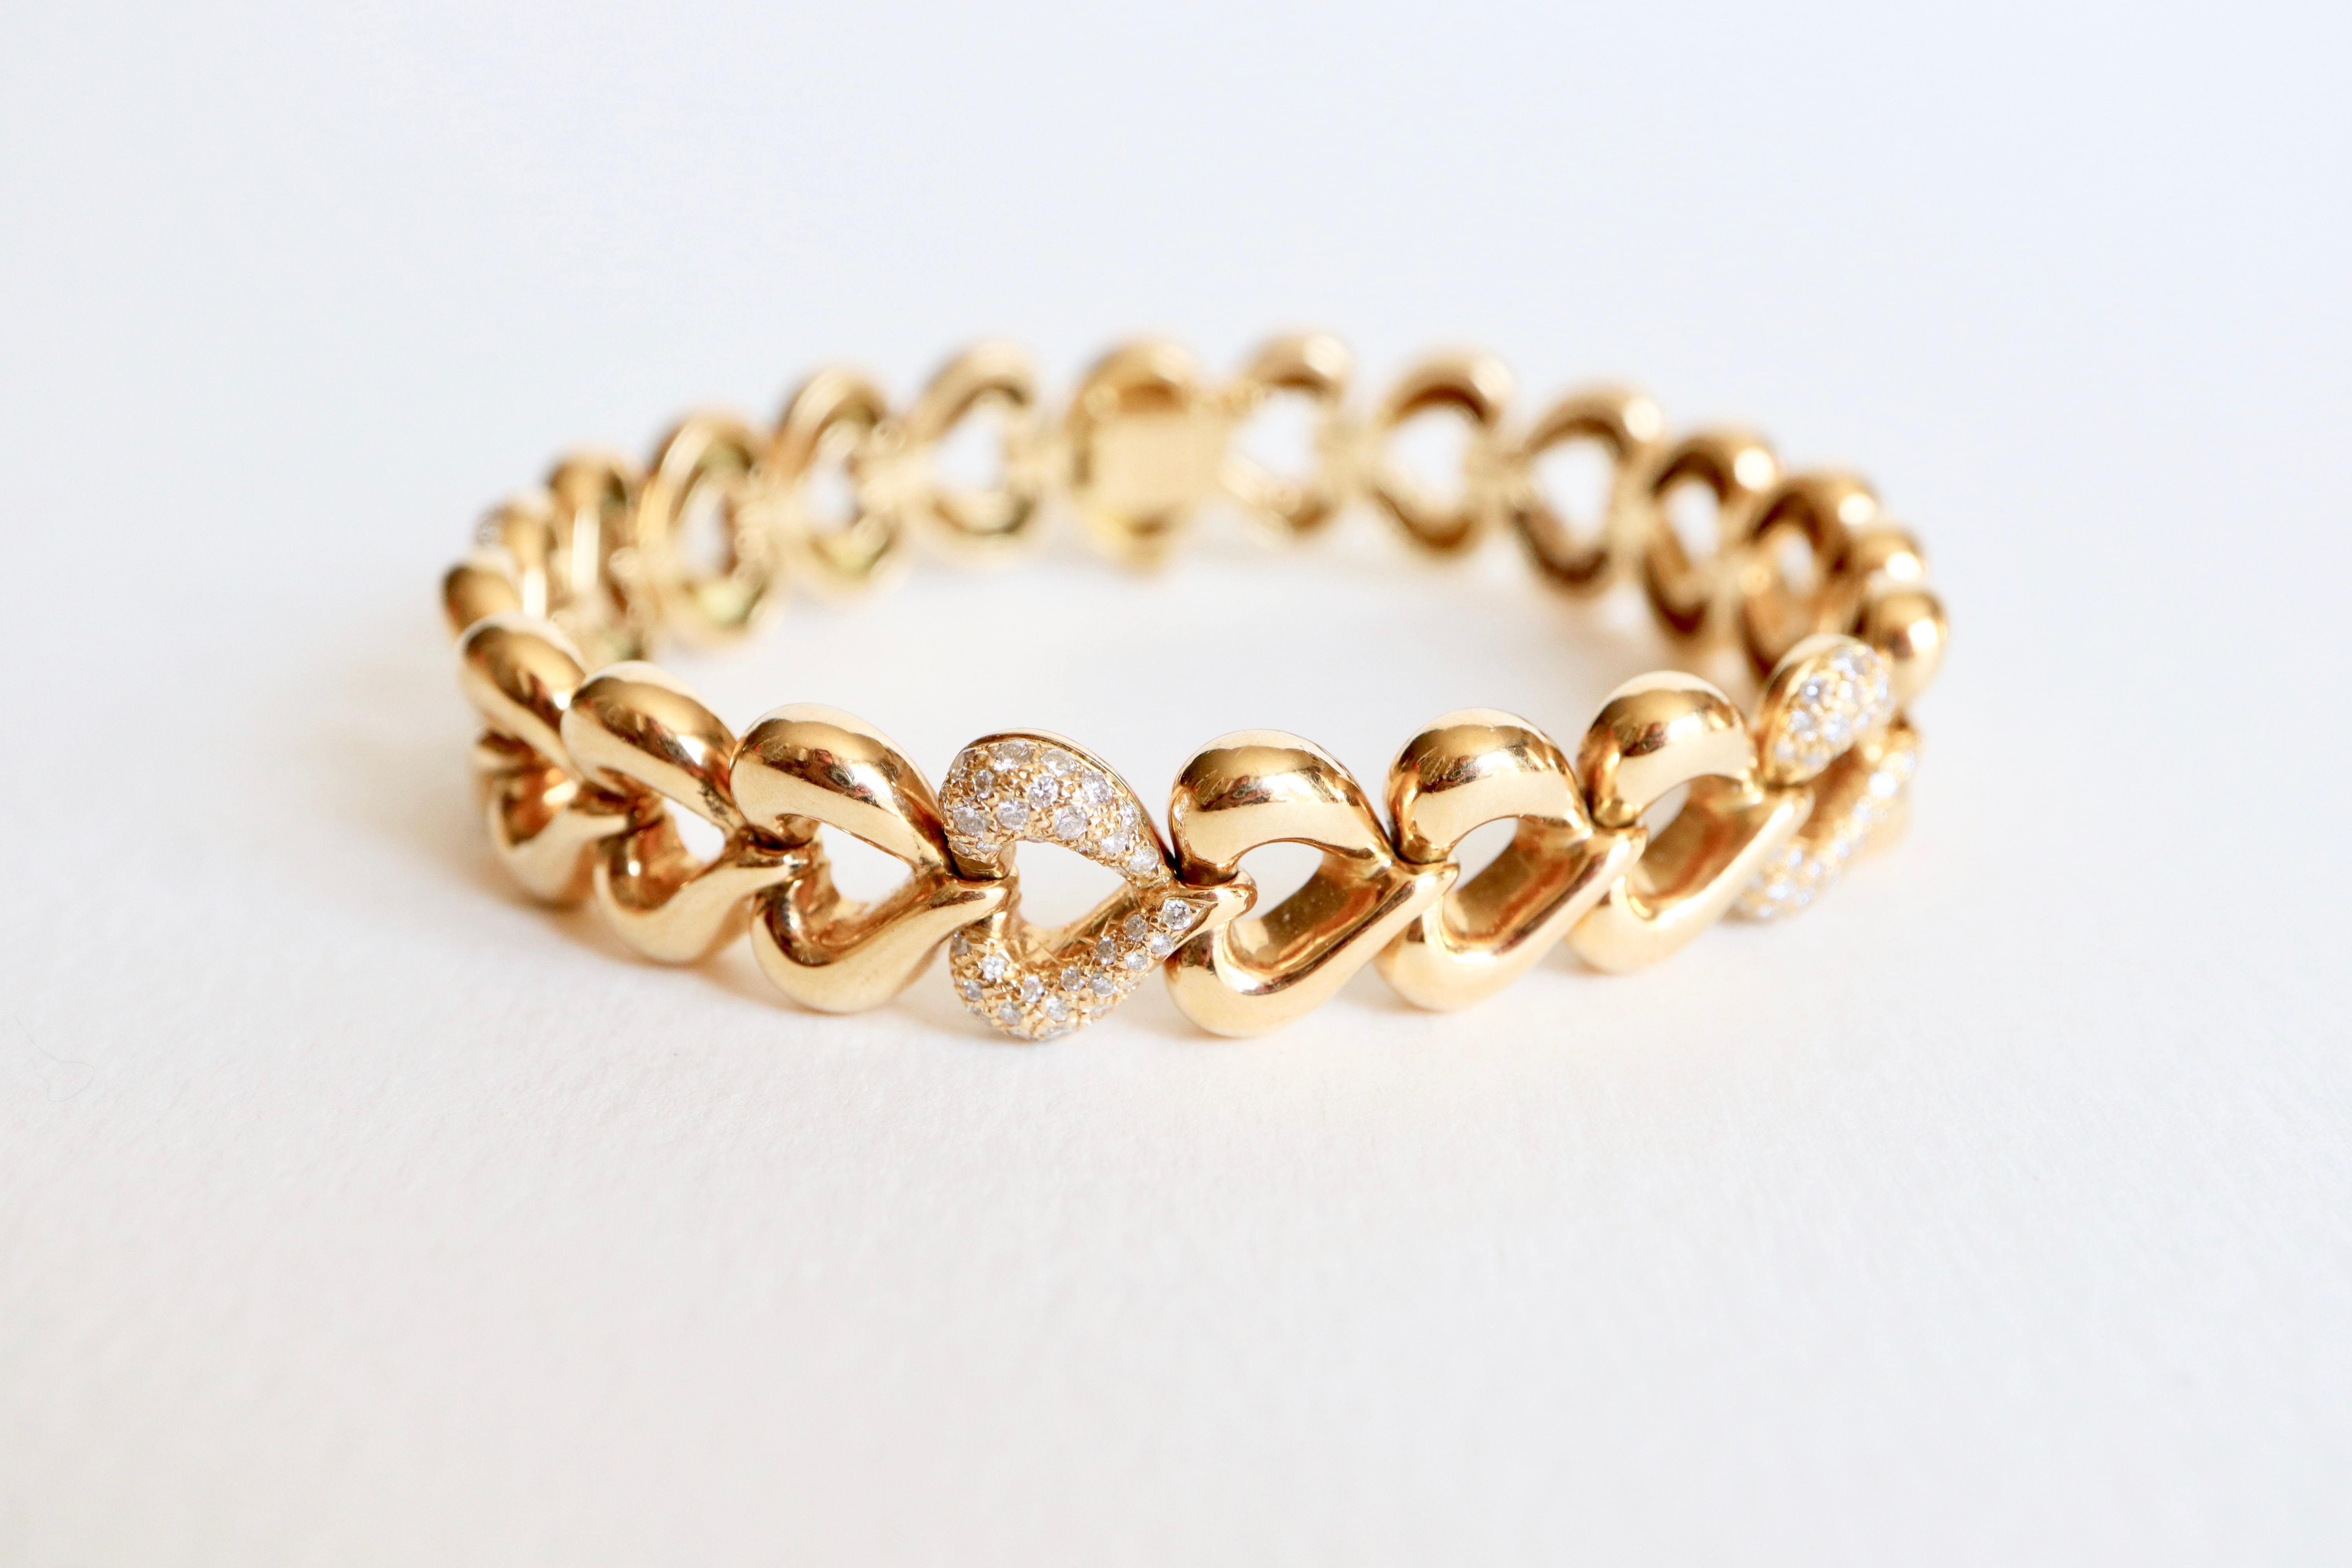 VAN CLEEF & ARPELS Articulated Heart Mesh Bracelet in 18 Carat yellow Gold and Diamonds.
There are 22 Heart Links. Five of the Hearts meshes are paved with Diamonds
Length: 18 cm Width: 1.3 cm
Tongue clasp with Security. 
The bracelet is signed VCA